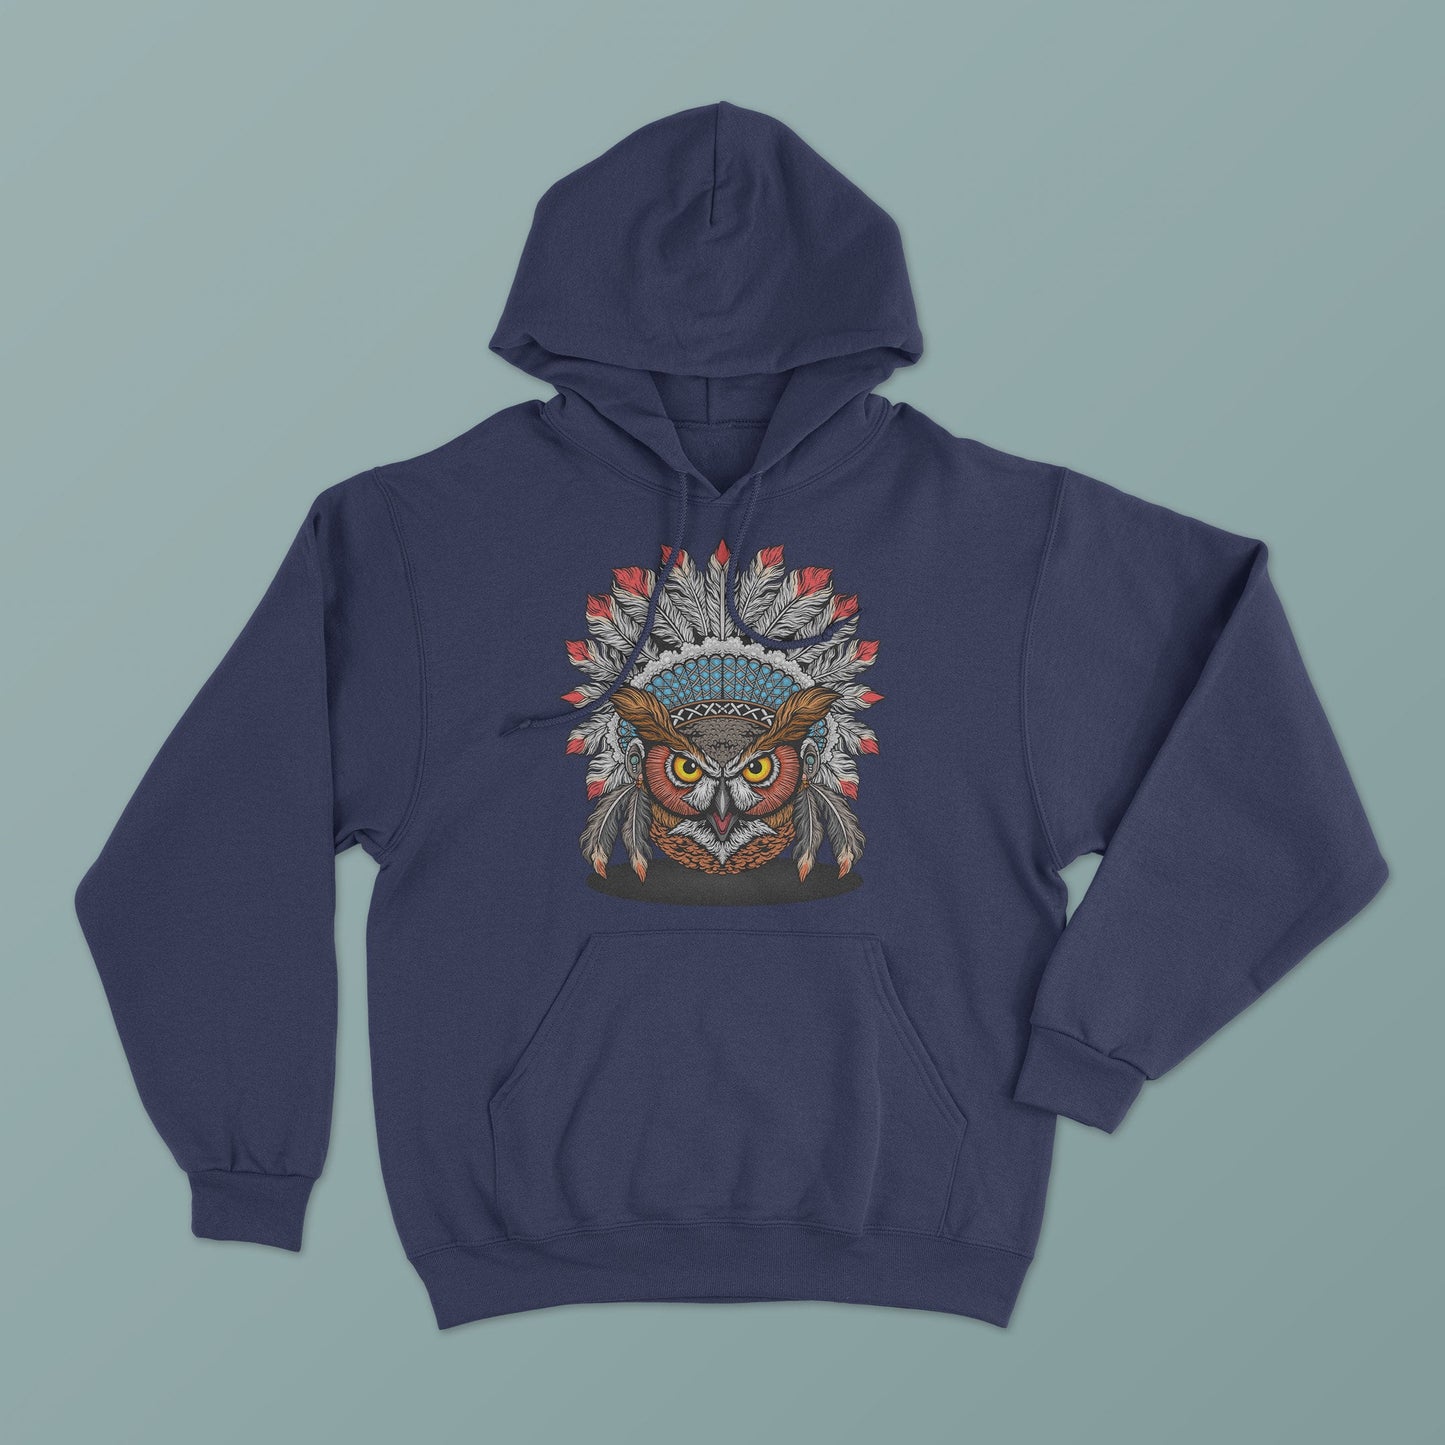 Owl Totem Print Hoodie - Unique Graphic Hoodie with Native American Design